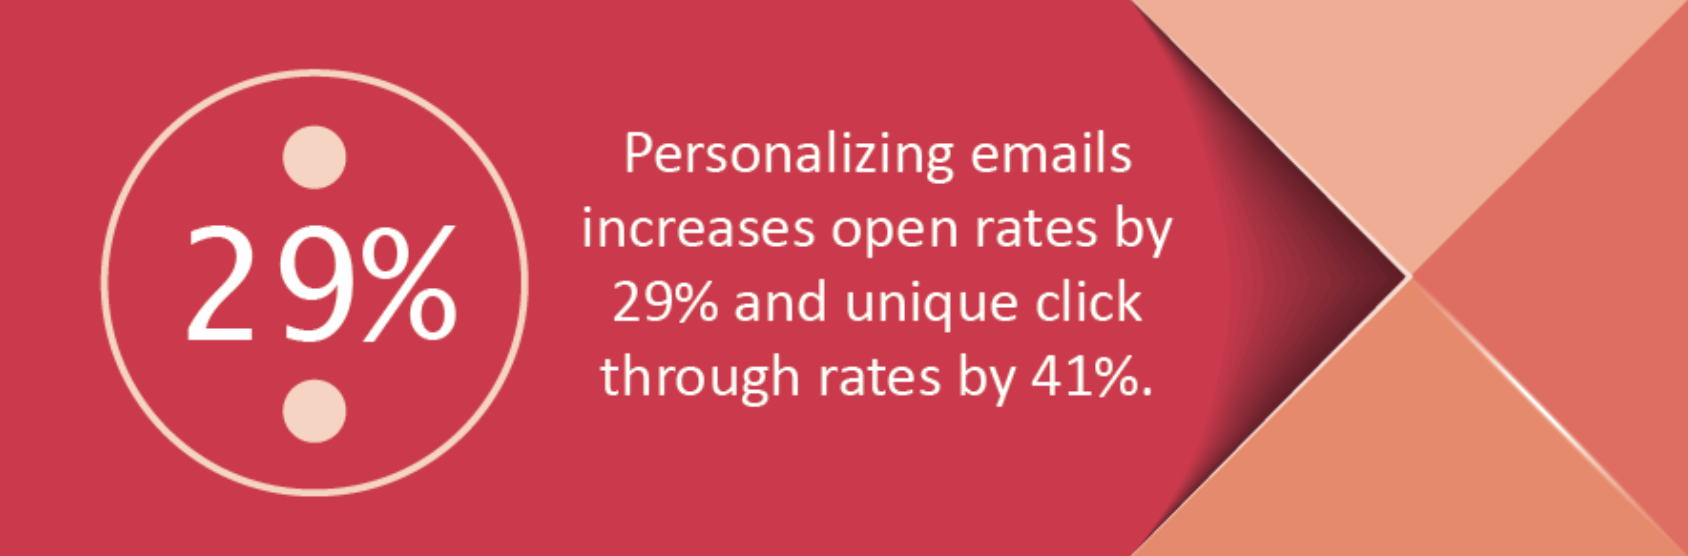 personalize emails